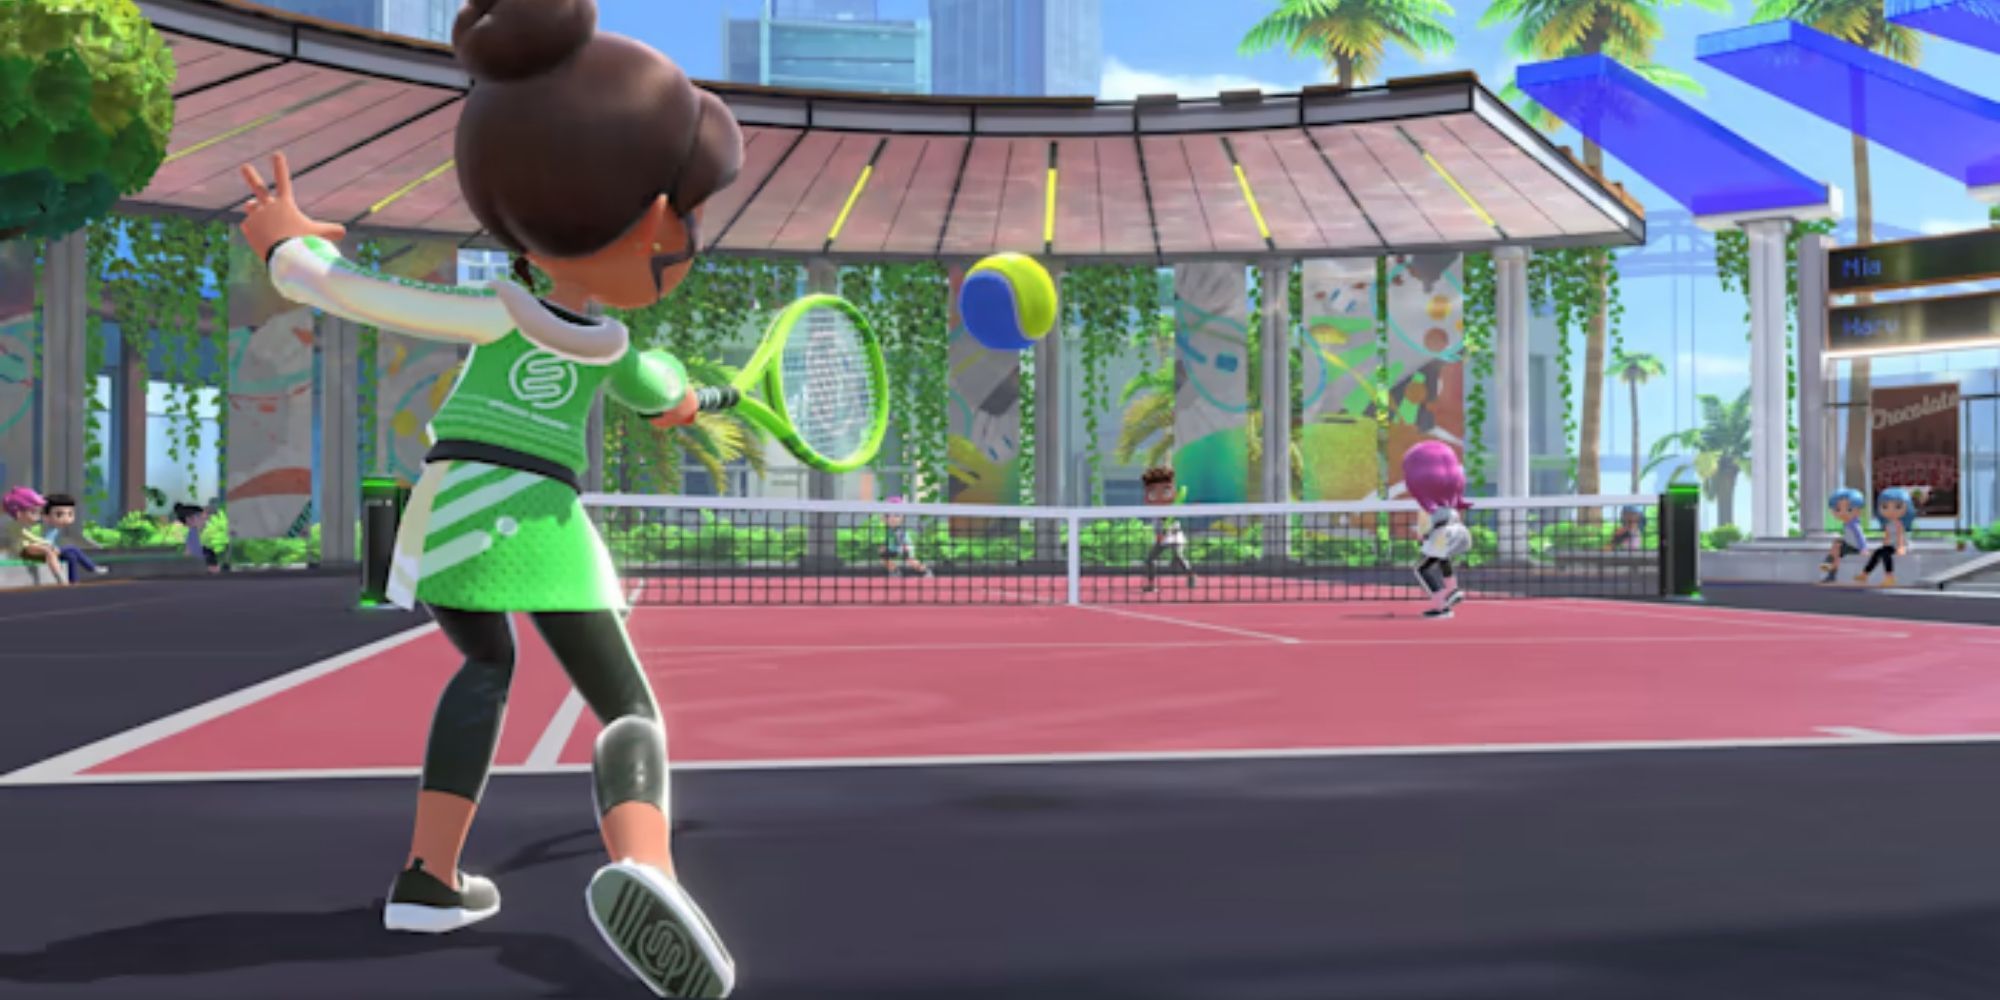 A Mii takes a swing in Badminton during a doubles match